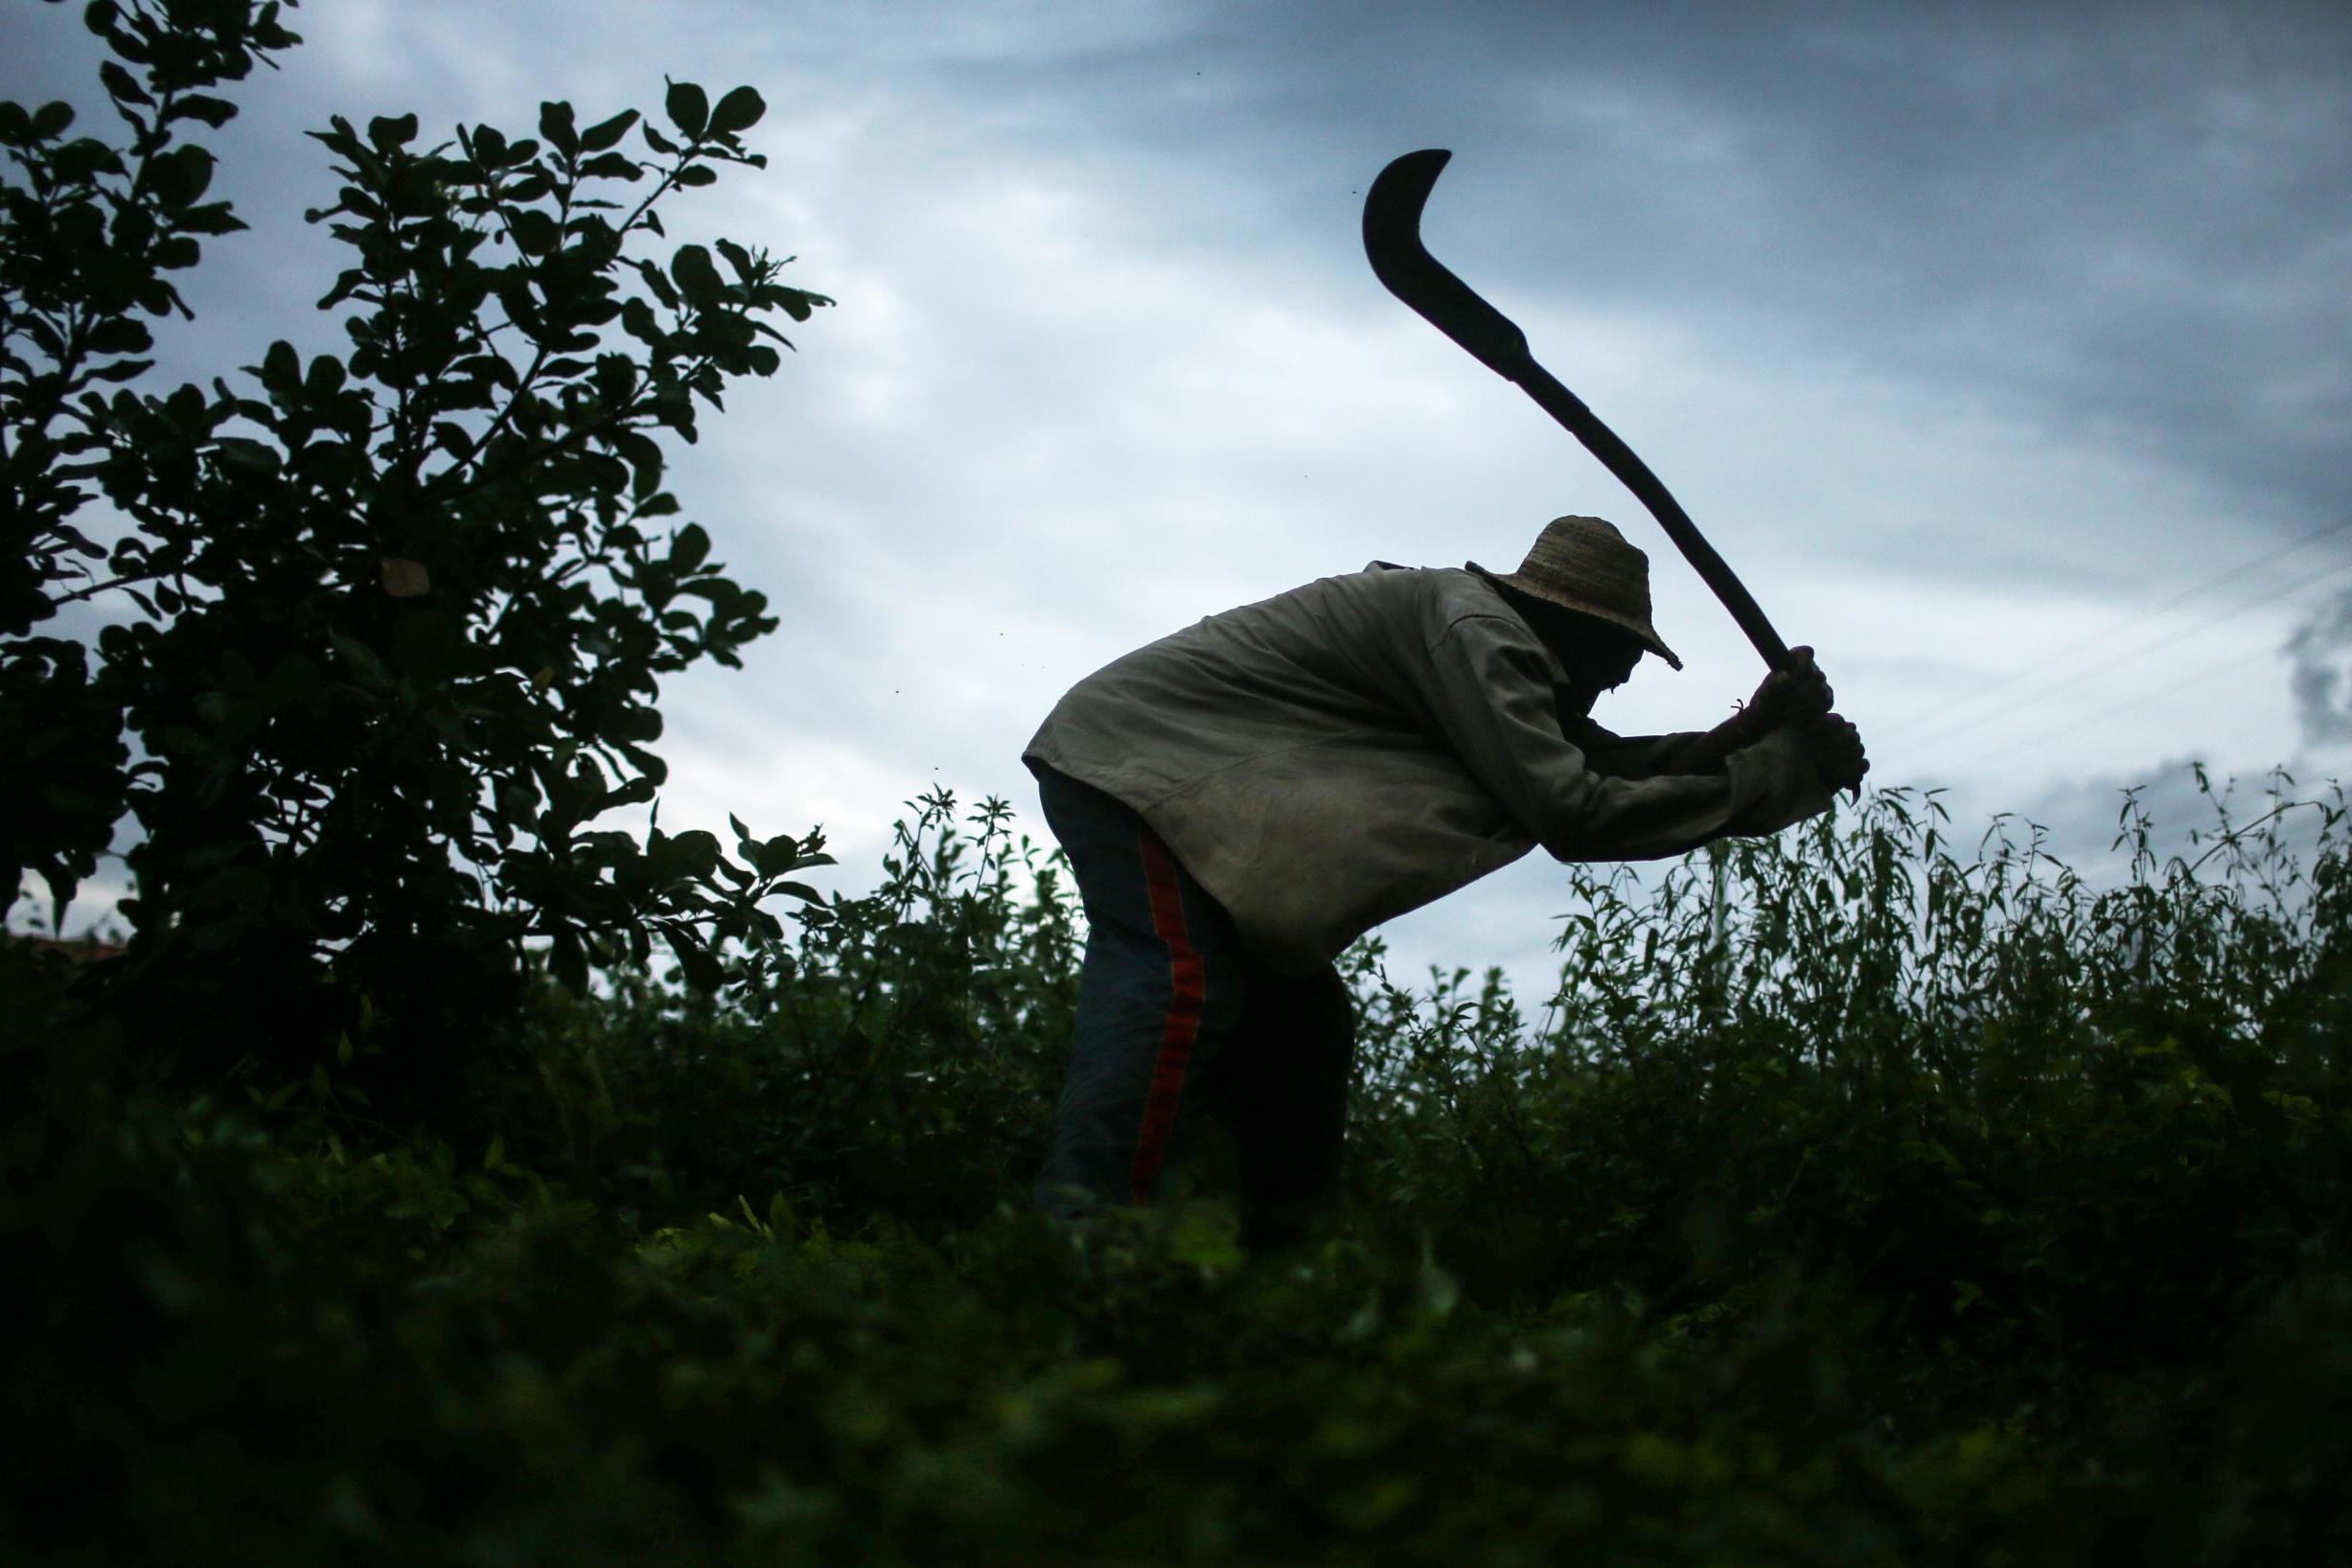 A former slave demonstrates how he clears brush with his sickle on the land he farms in Brazil (Getty)